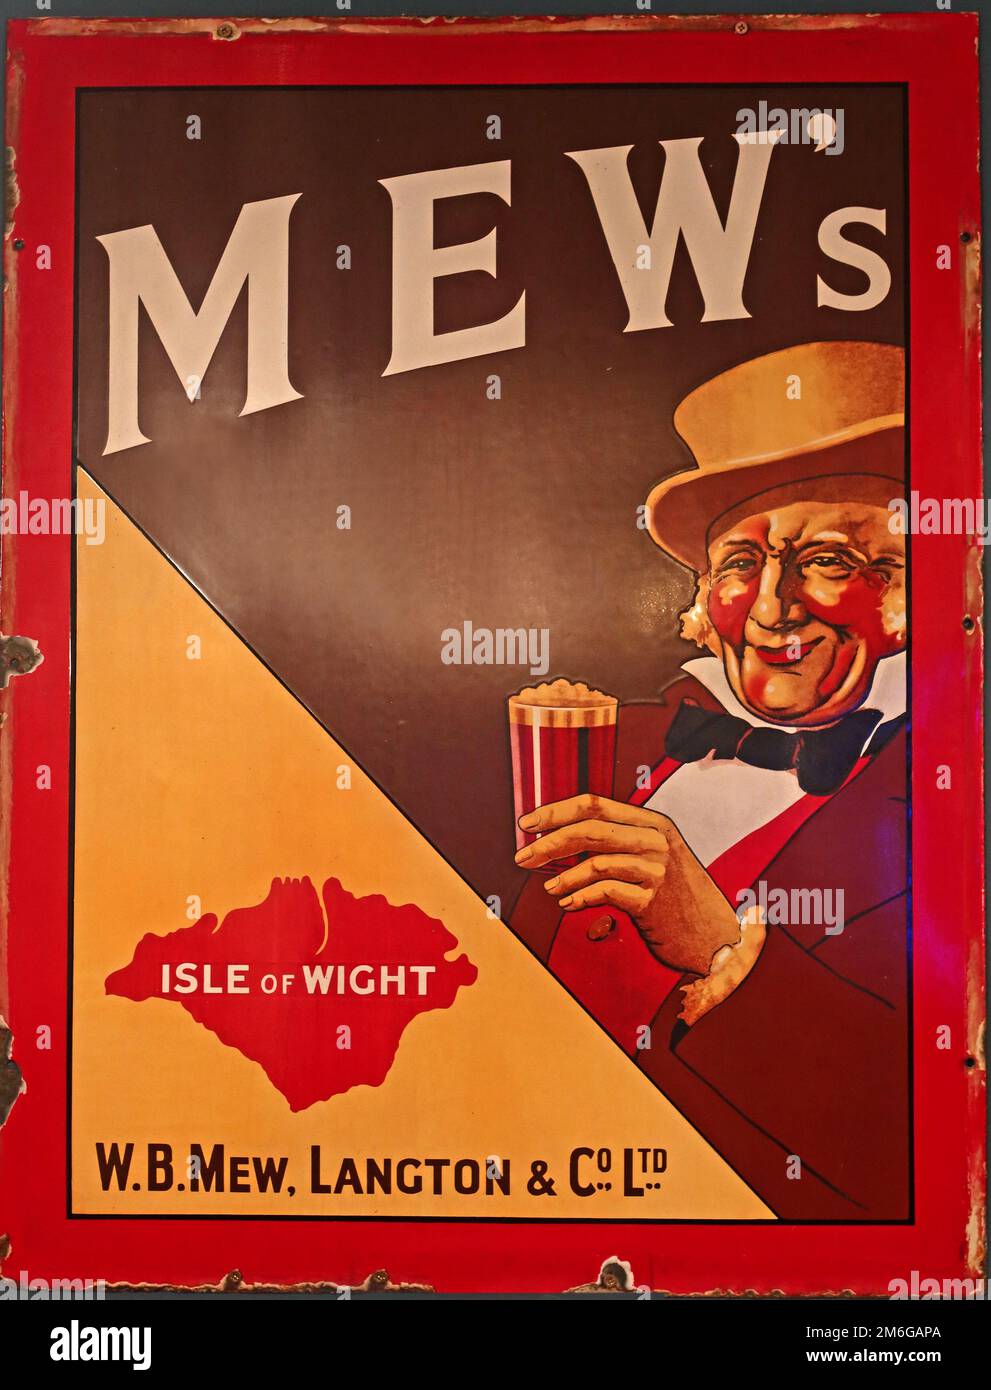 MEW, MEWs Isle Of Wight ales, metal enamel advertisement promotion of beers and ales Stock Photo